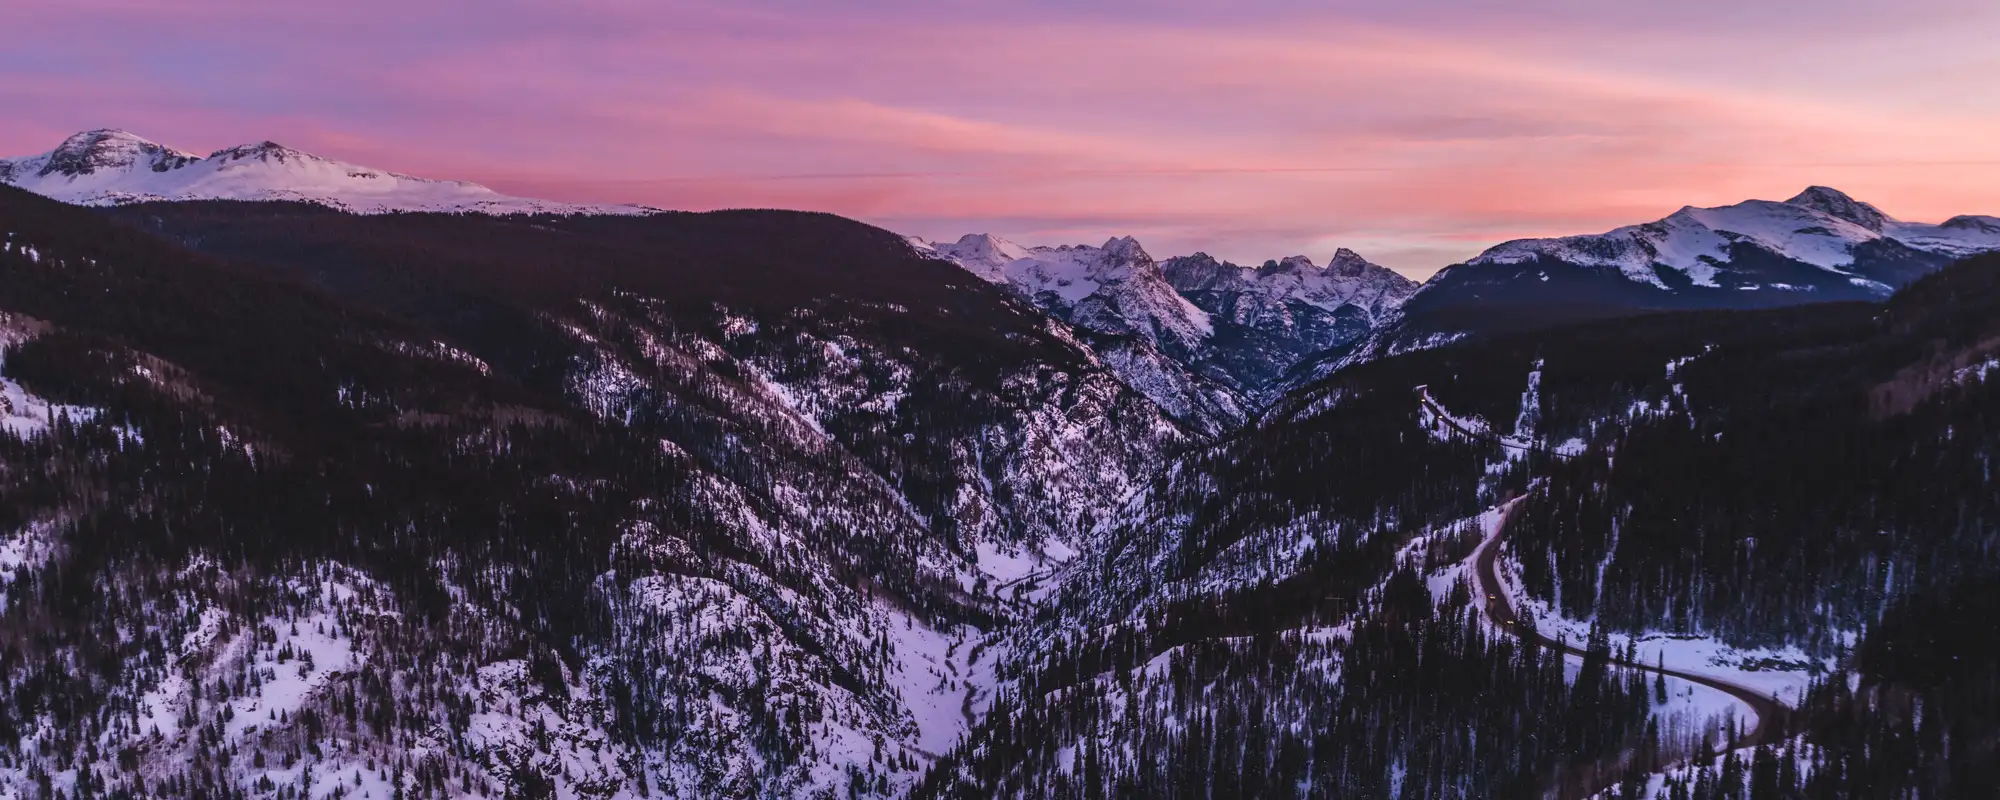 Sunset over the Grenadier Mountains and Highway 550 near Silverton, Colorado